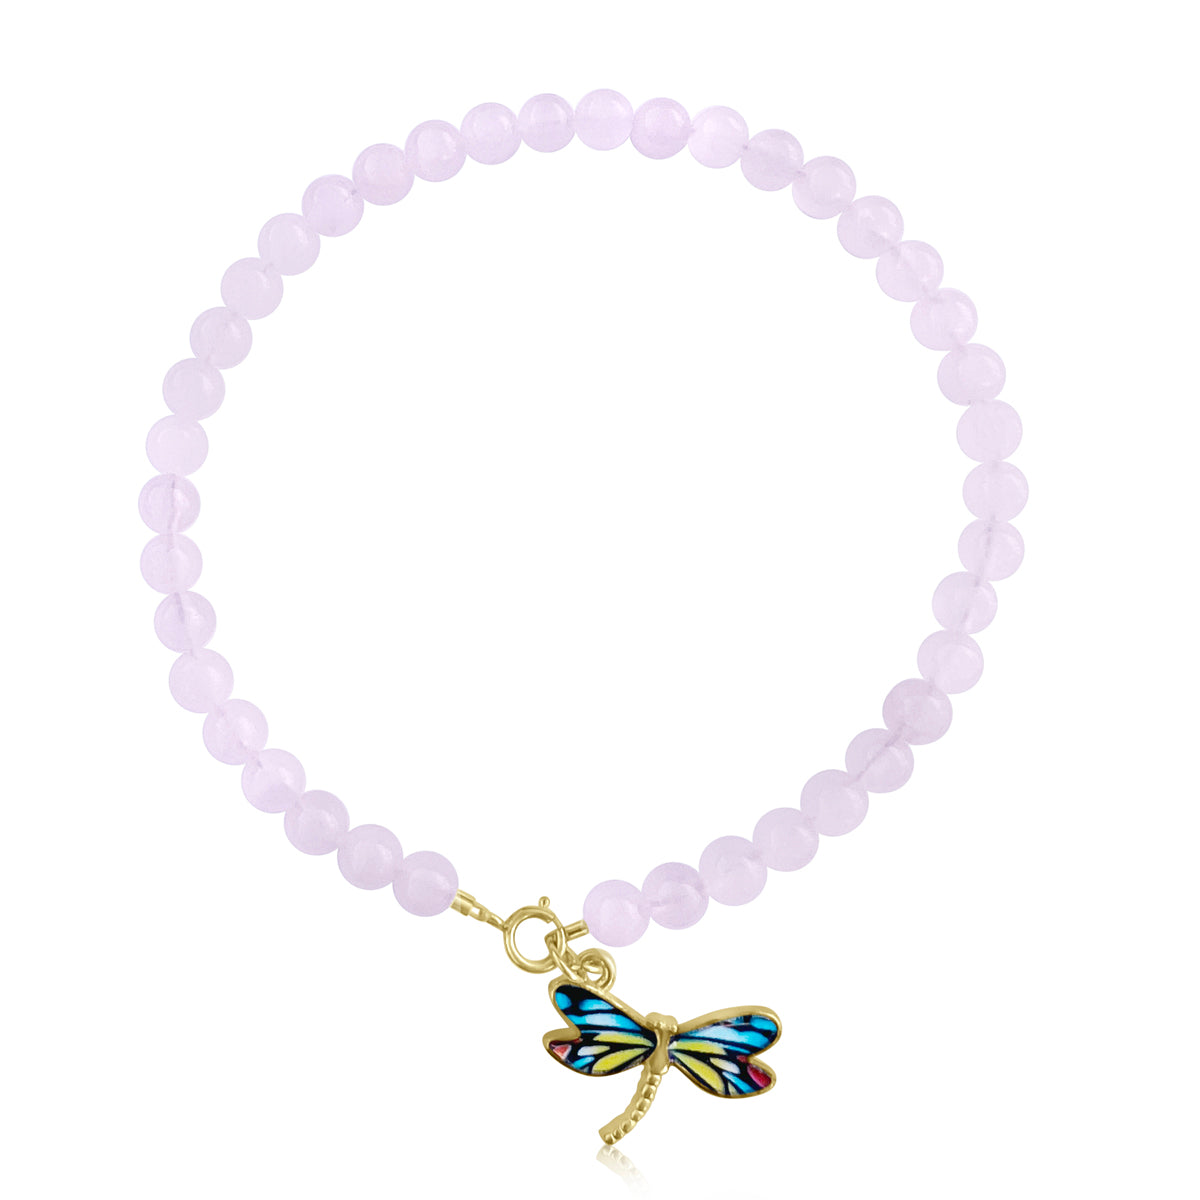 Experience the gentle embrace of love with the Dragonfly Whispers - Rose Quartz Anklet, a symbol of compassion and healing, guiding you to walk your path with grace and tenderness.